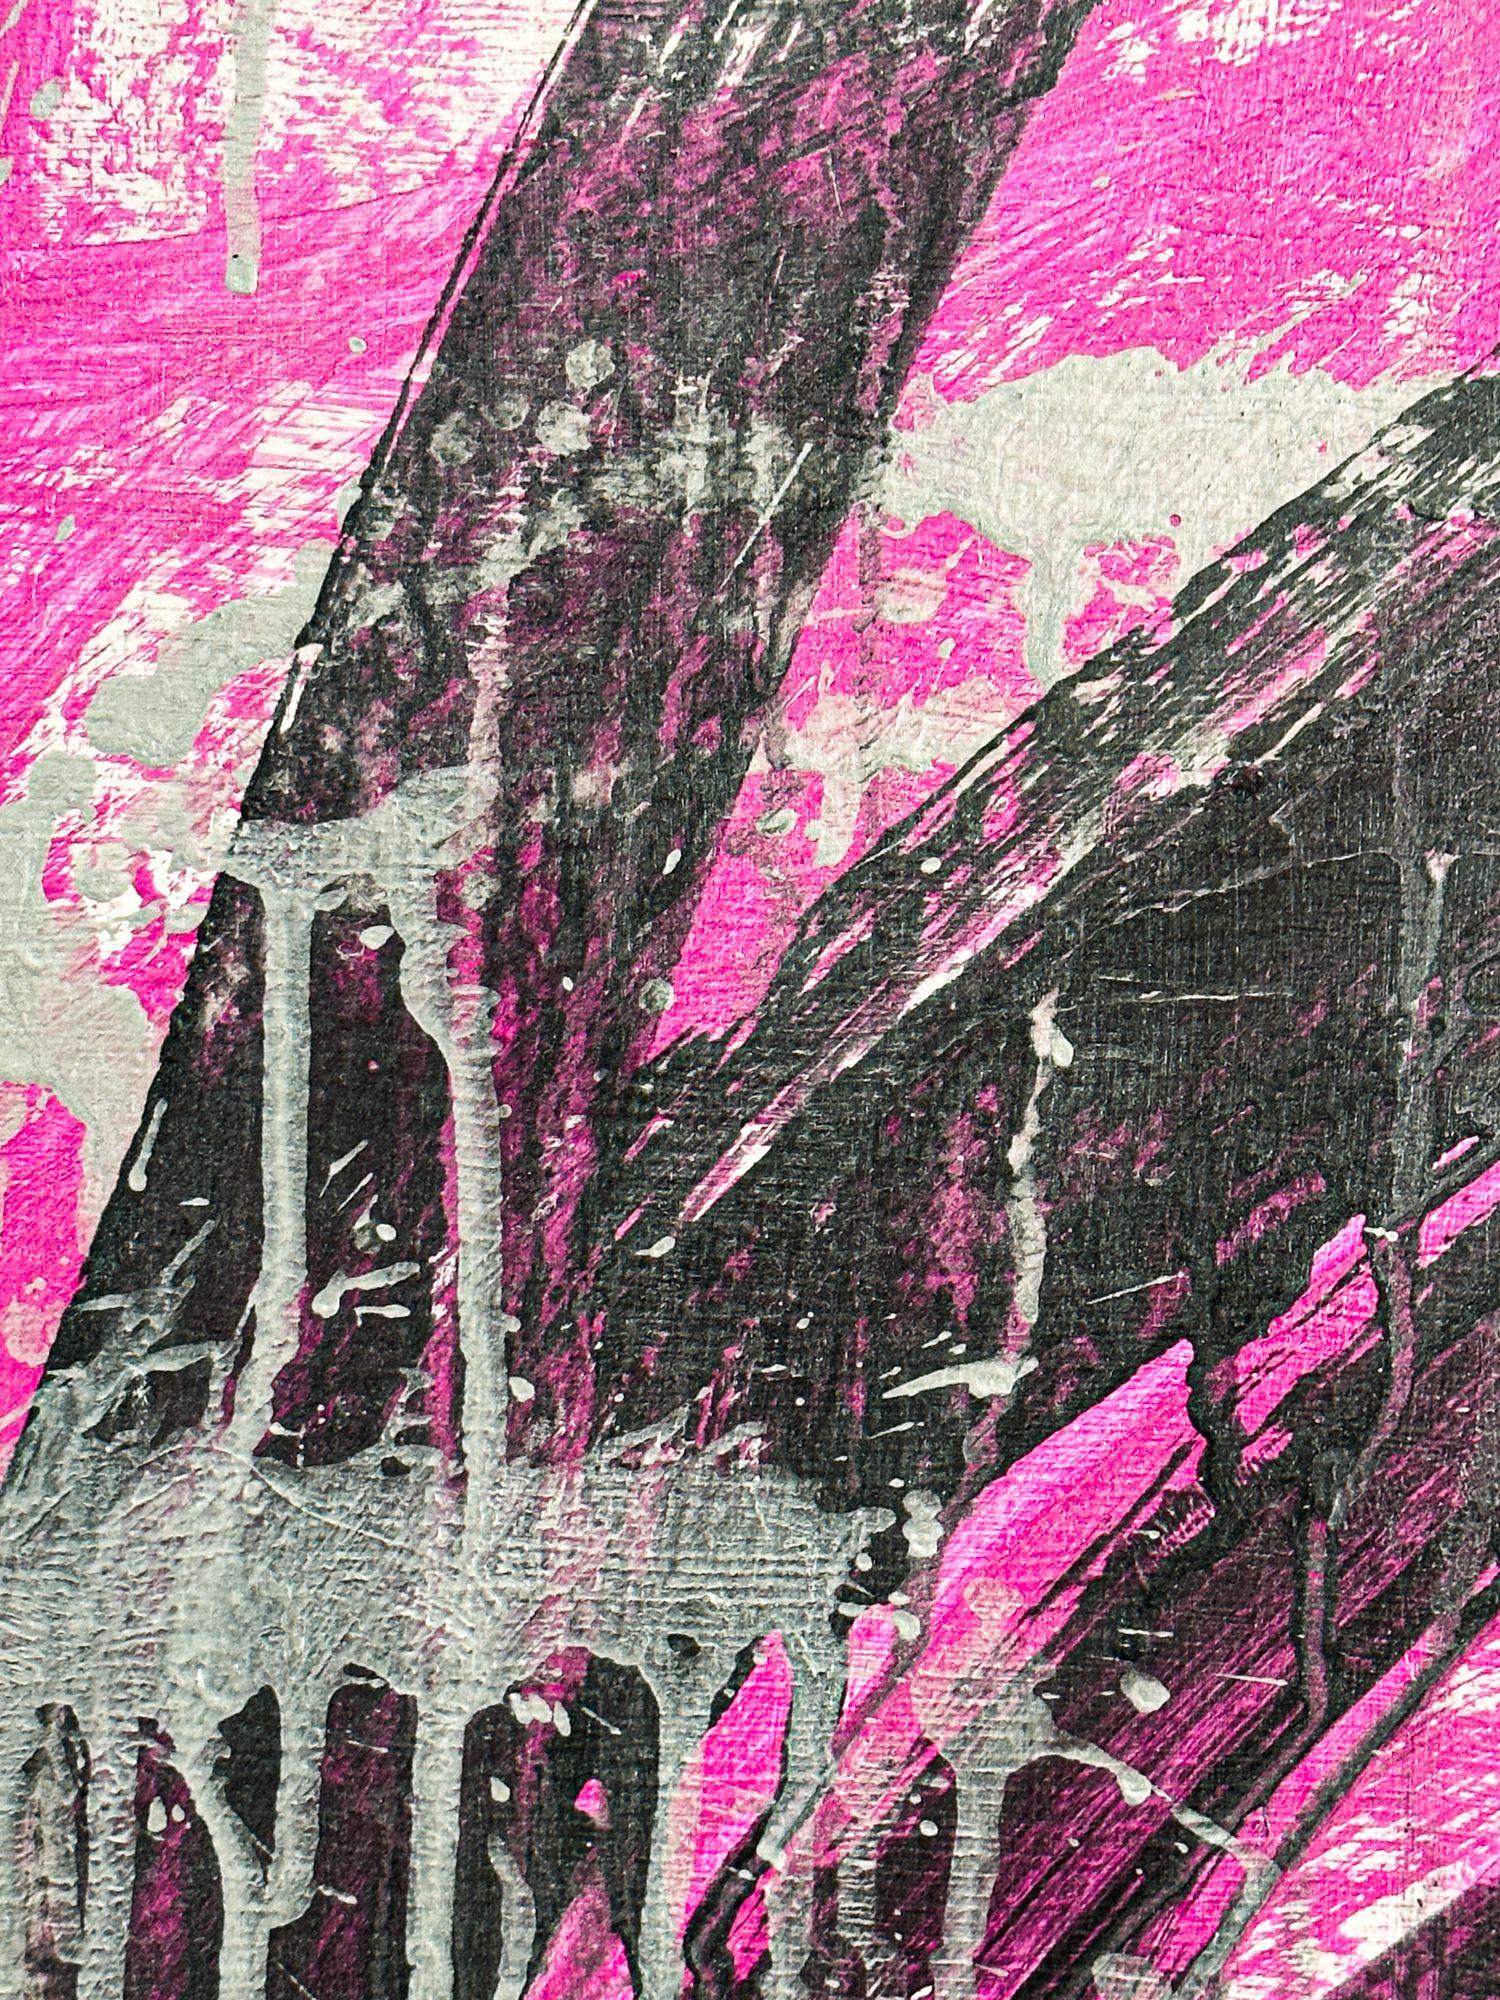 This work was inspired by the force of nature, something we can fear or admire.    The art was created by painting on Yupo paper texturized with gesso, using bright pink, silver and black paint. The painting is sealed and can be mounted and framed